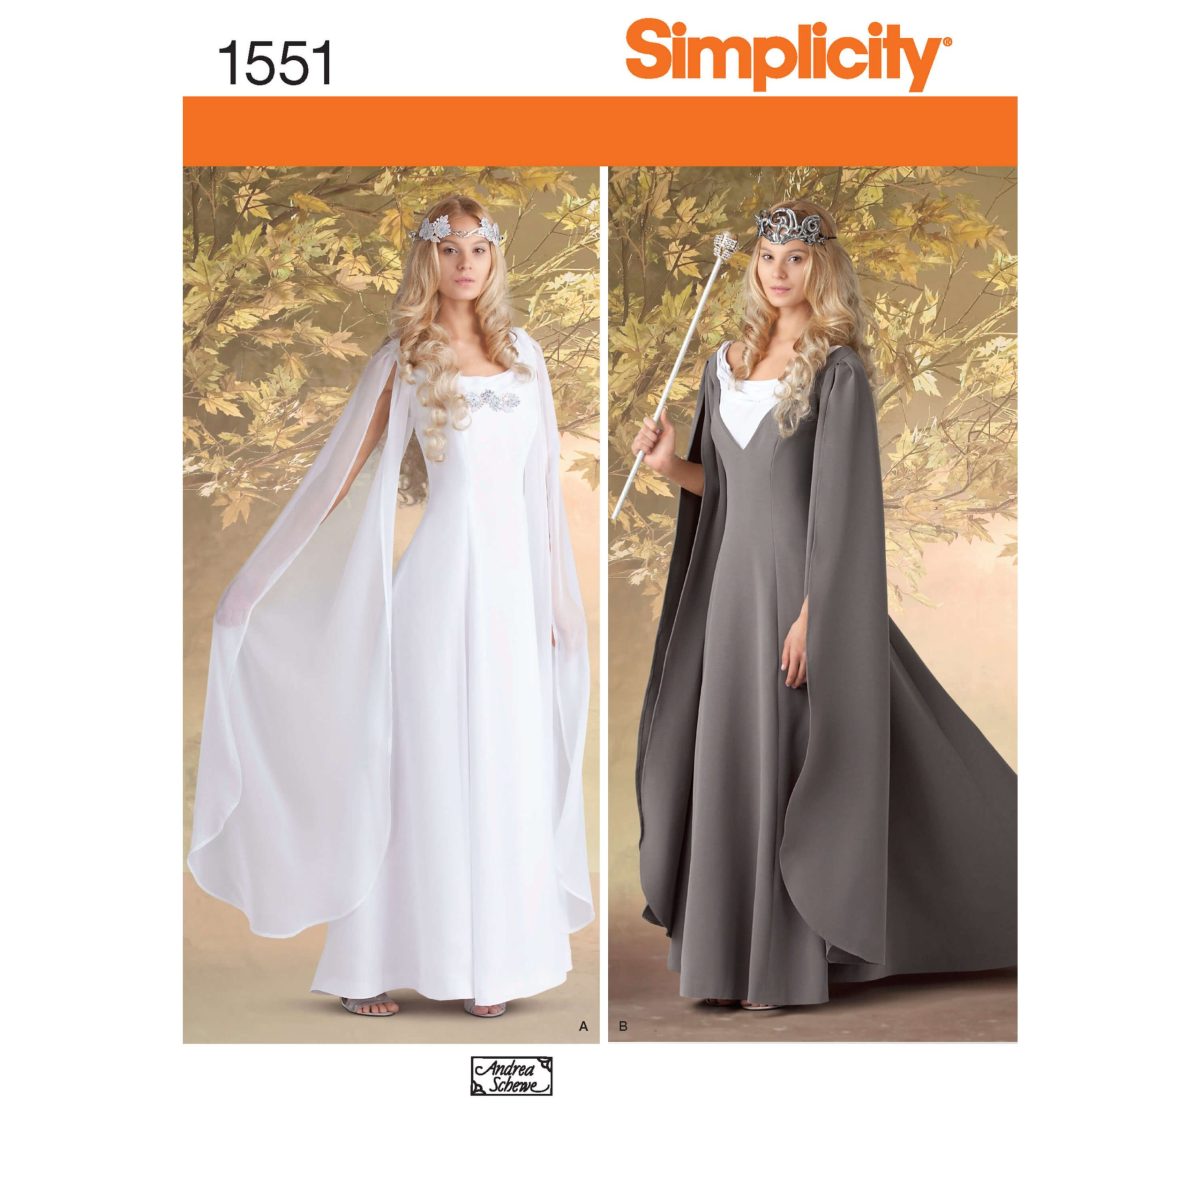 Simplicity Sewing Pattern 1551 Misses' Costumes